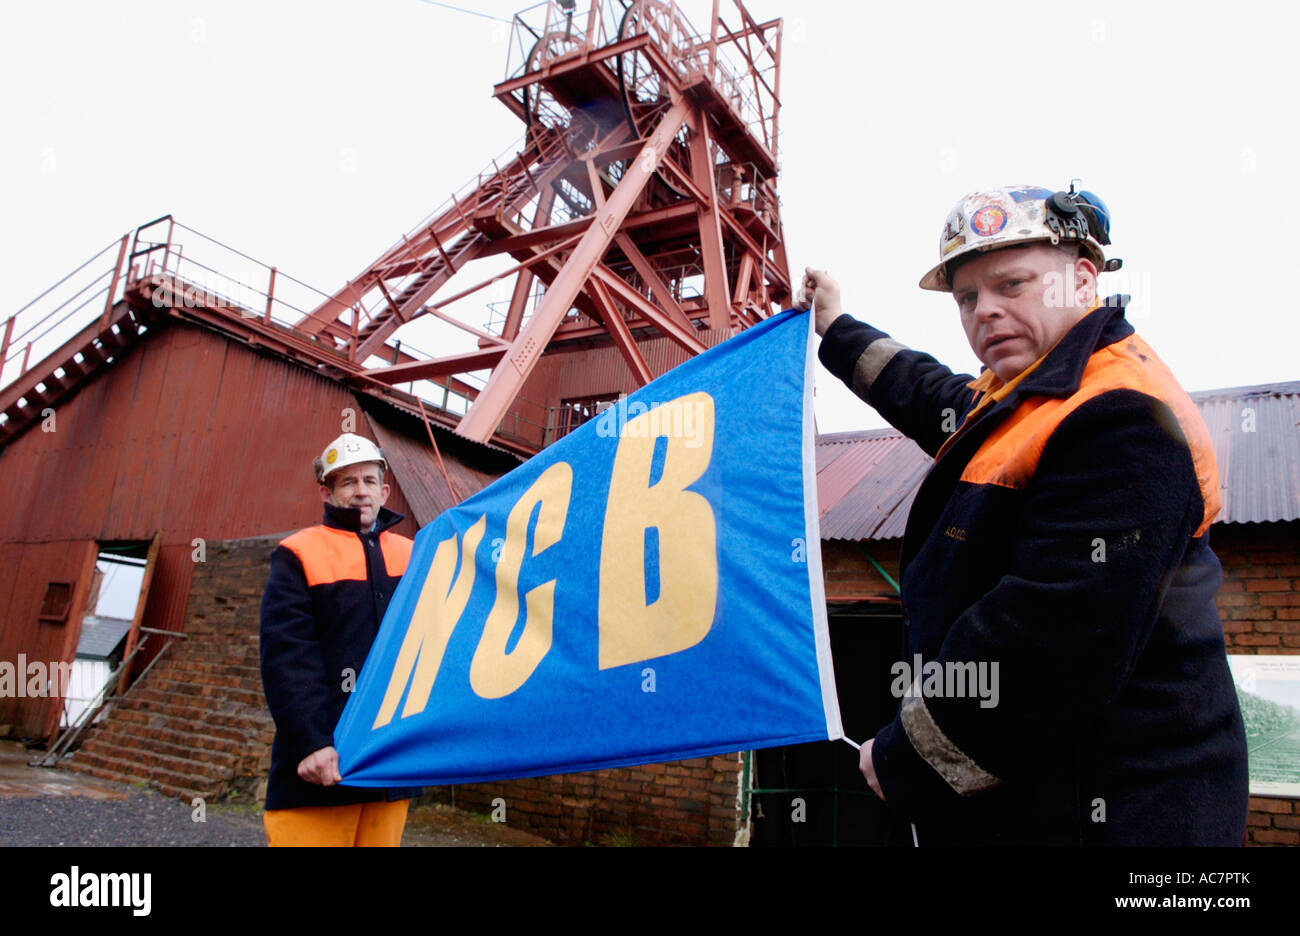 Guides, former miners,  with NCB 'National Coal Board' flag at the Big Pit National Coal Museum Blaenavon South Wales UK Stock Photo